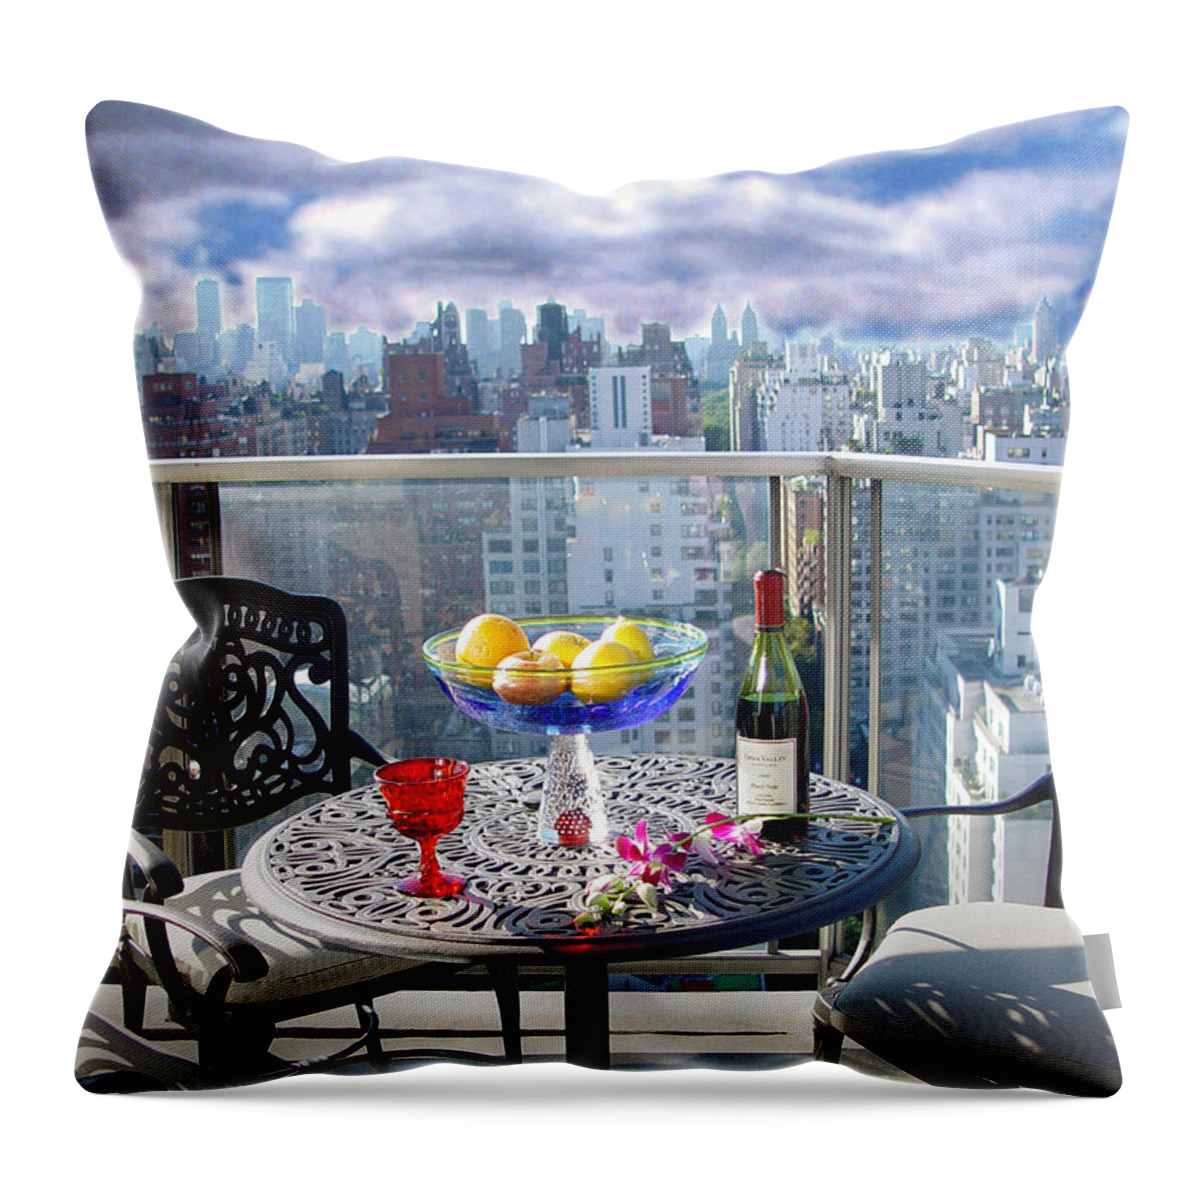 Terrace Throw Pillow featuring the photograph View From The Terrace by Madeline Ellis